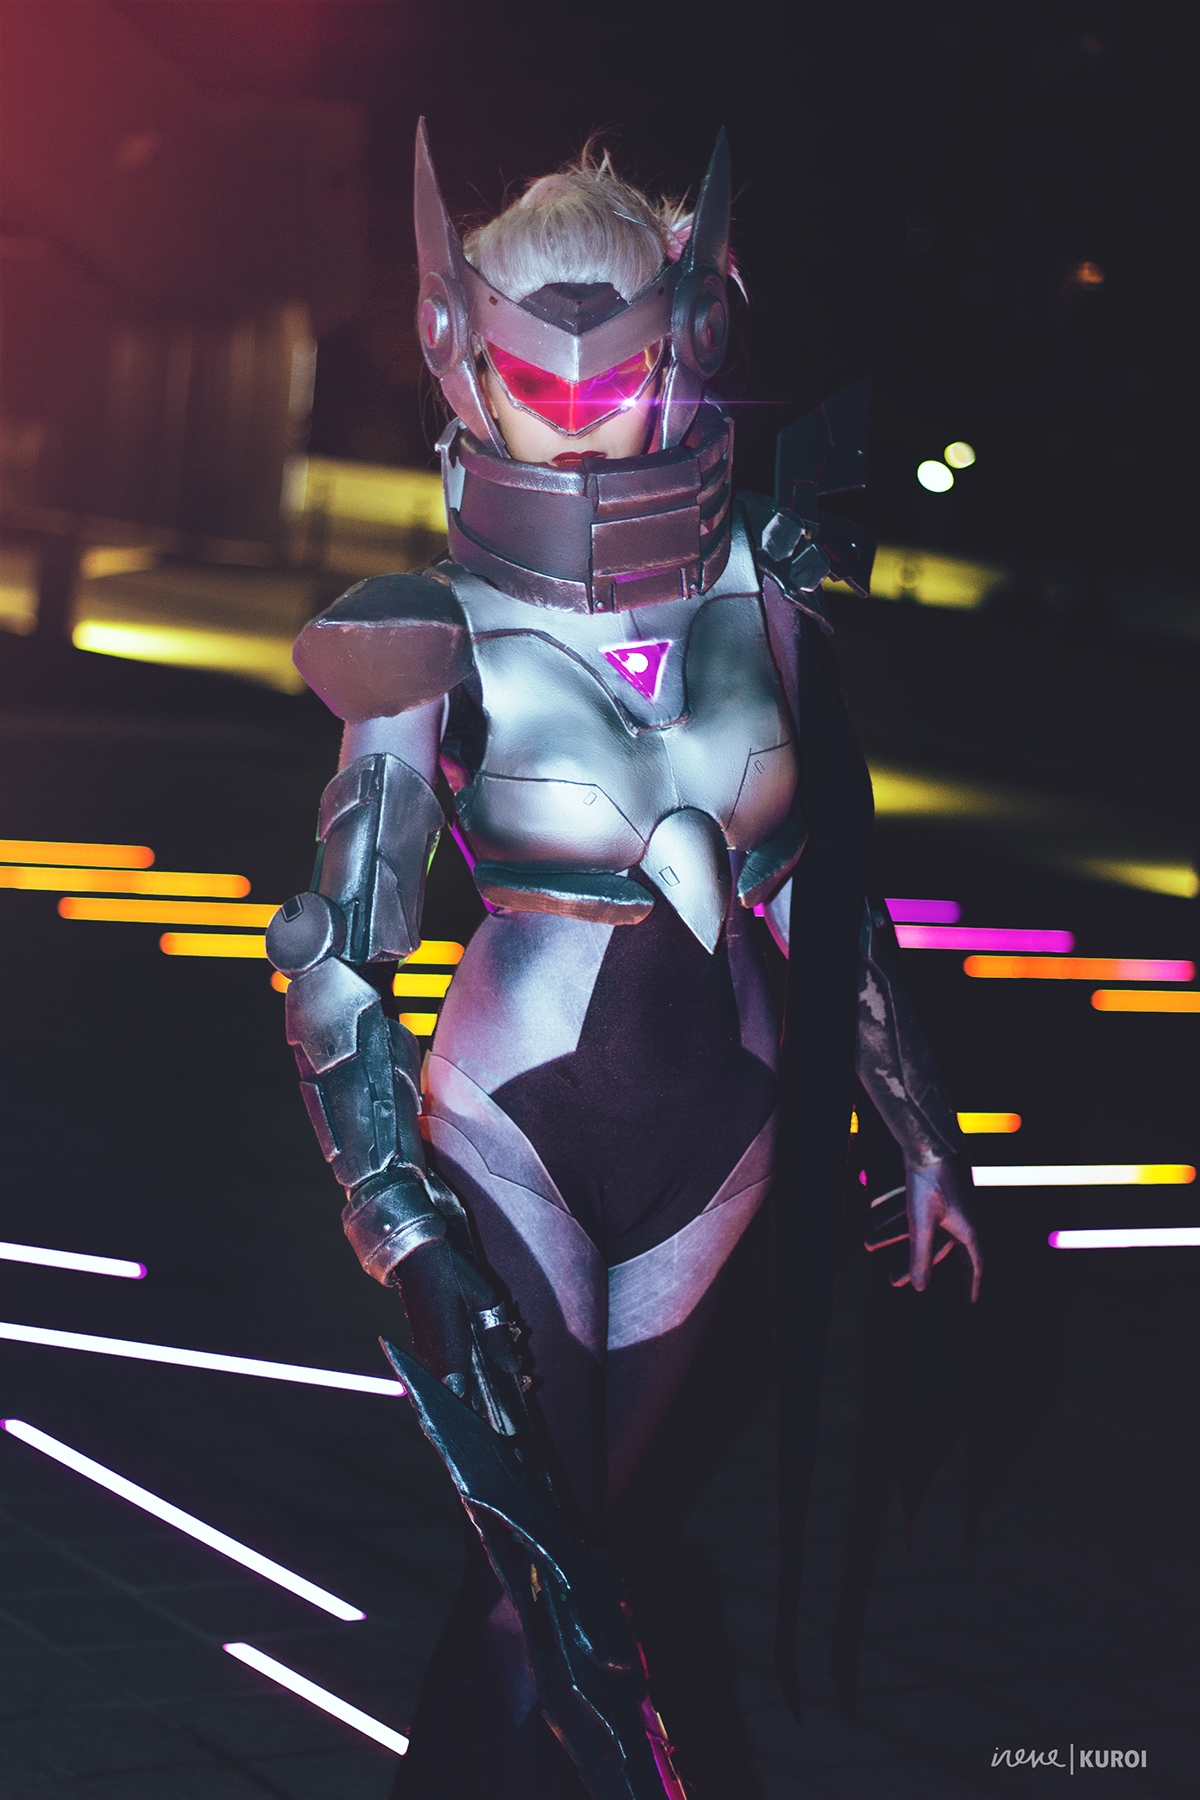 Cosplay league of legends lol Cosplayer robot Cyborg ciborg videogame online online game handamde costume fiora PROJECT Fiora PROJECT LOL